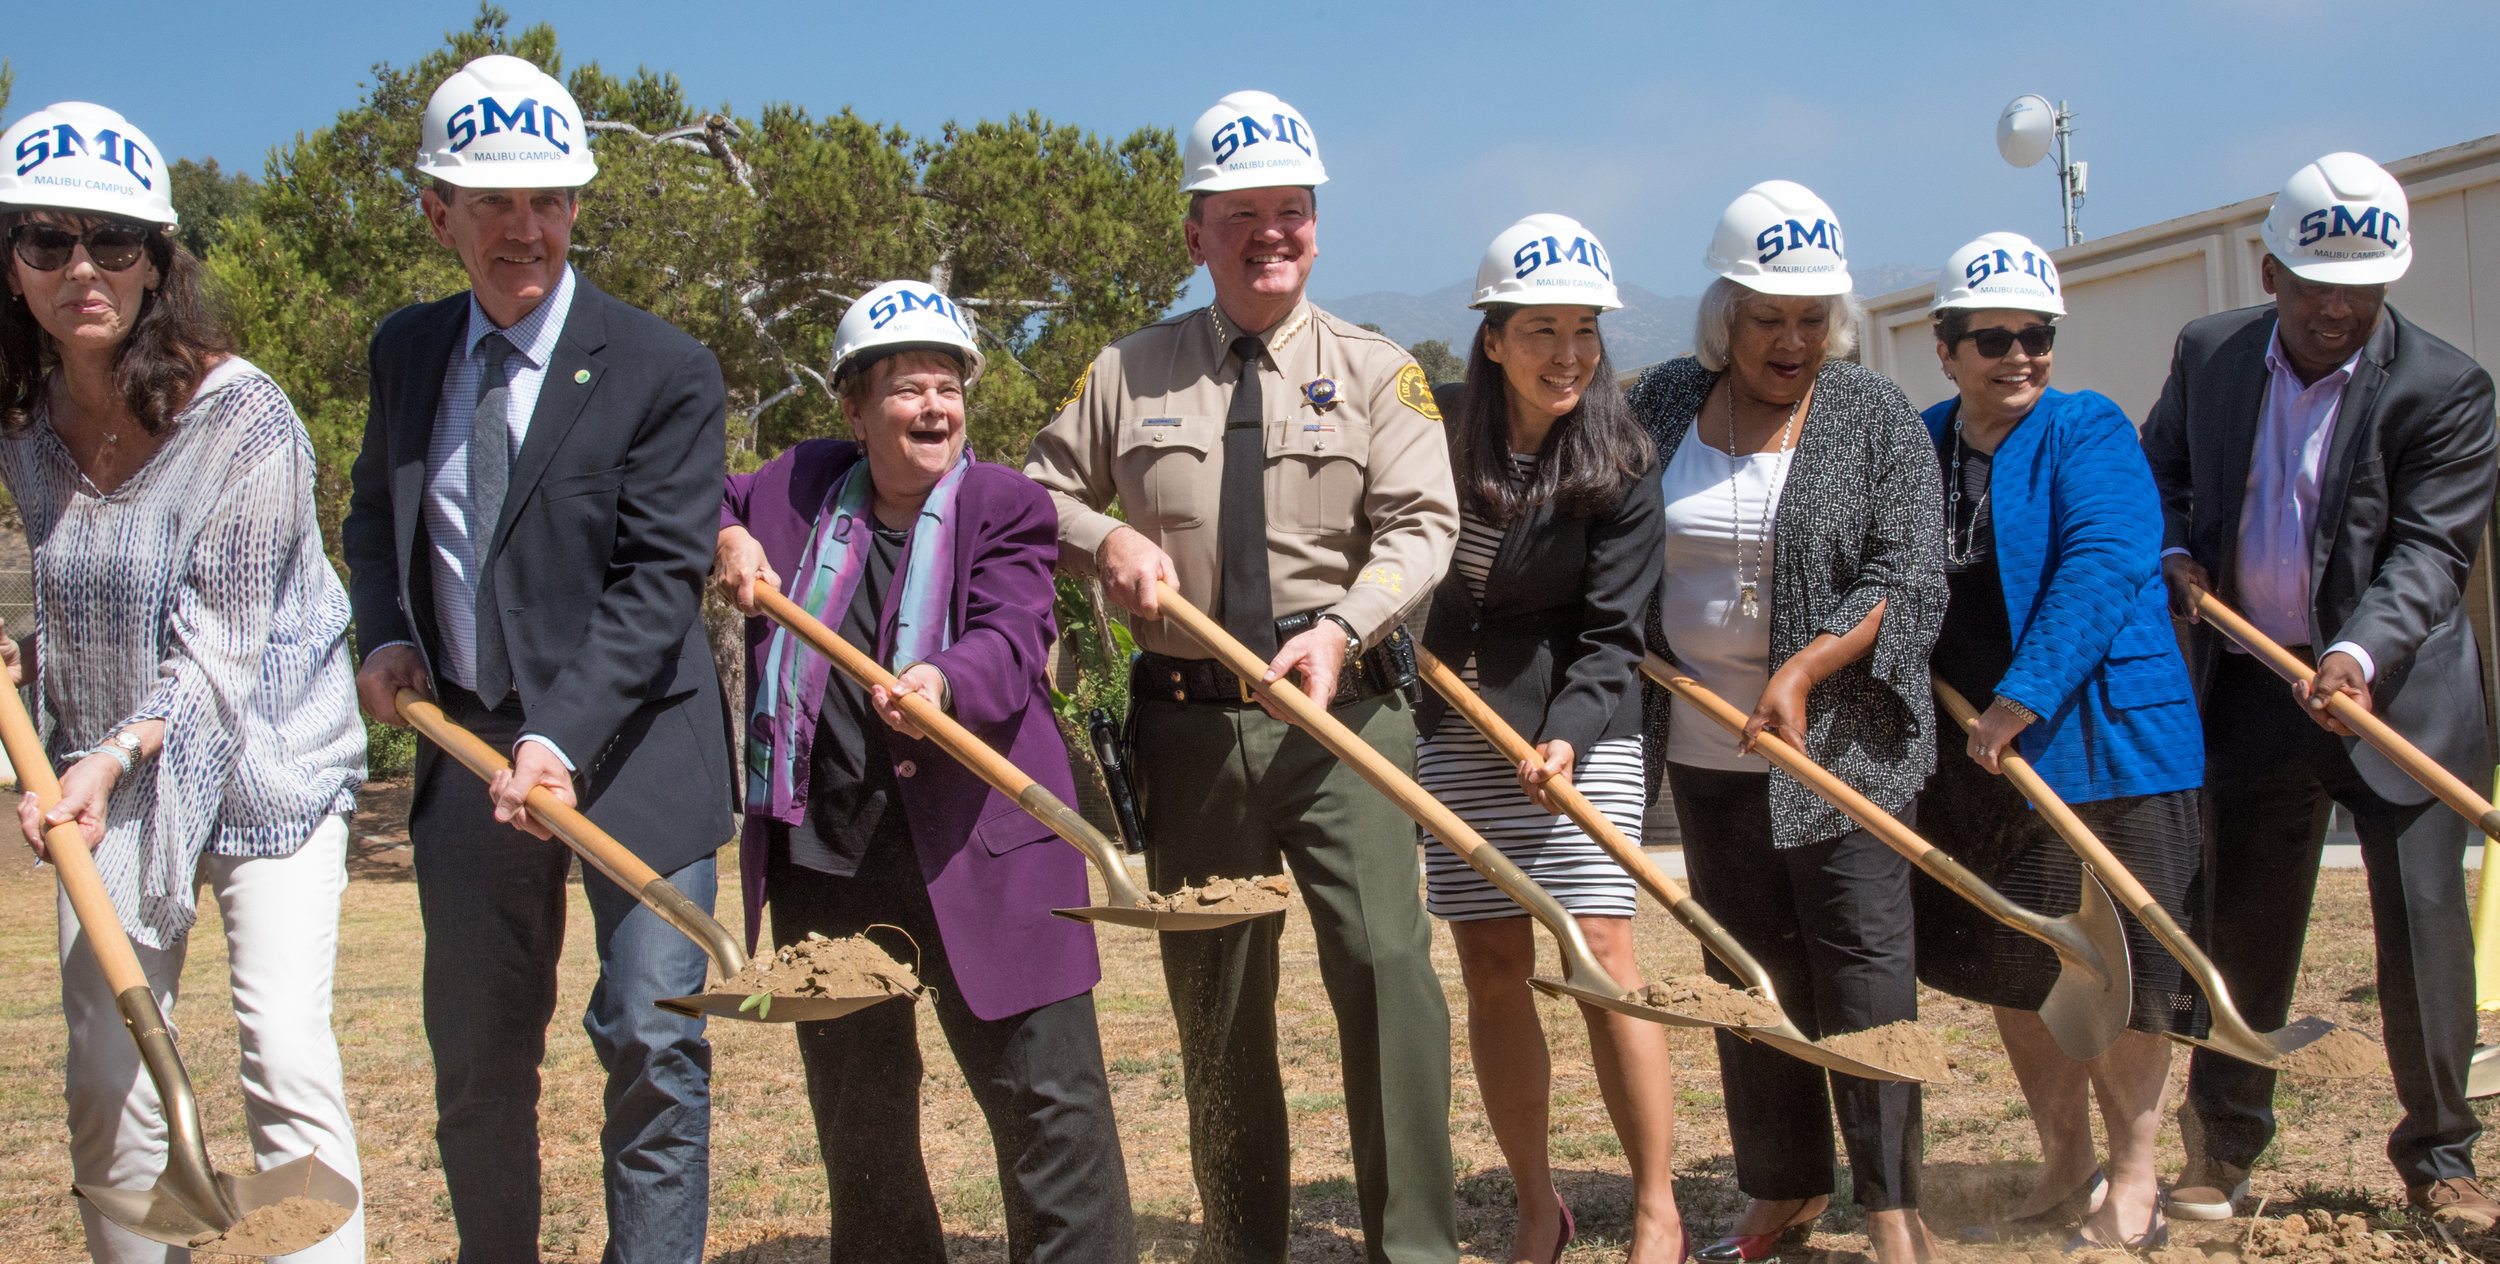  Santa Monica College President Kathryn Jeffery (third from right), Sheriff Jim McDonald (center), Mayor Rick Mullen (second from left), and others begin the official groundbreaking of the Santa Monica College Malibu Campus & Los Angeles County Sheri